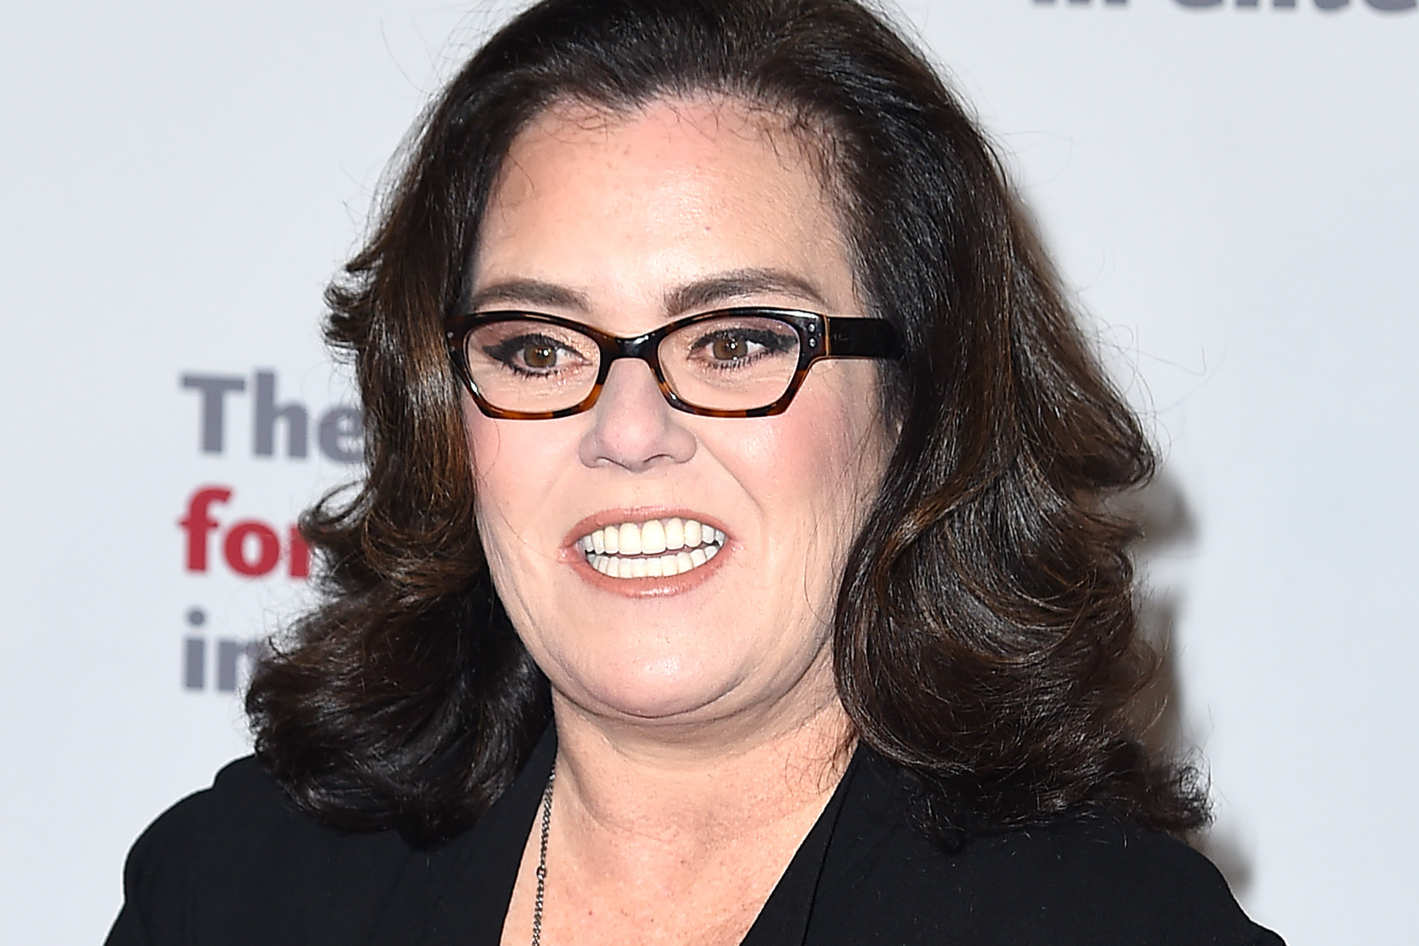 Rosie O’Donnell (image source: vulture.com) .